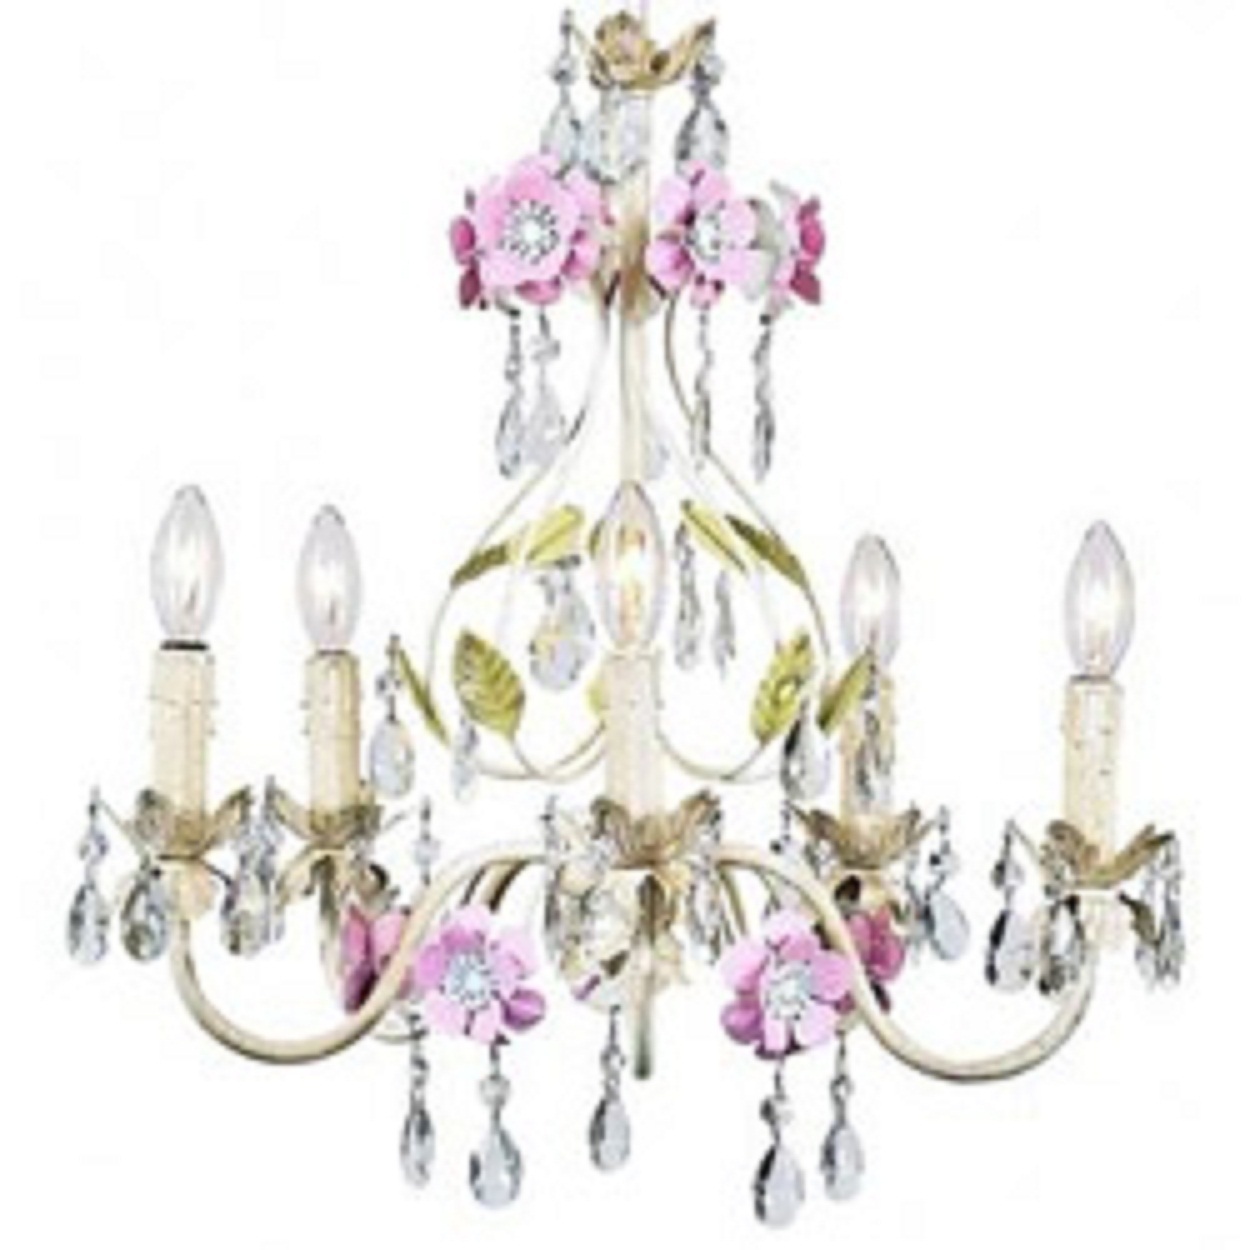  ANTIQUE SHABBY CHIC CHANDELIER OF  PASTEL FLORAL WITH DANGLING CRYSTALS AND  BE - $500.99